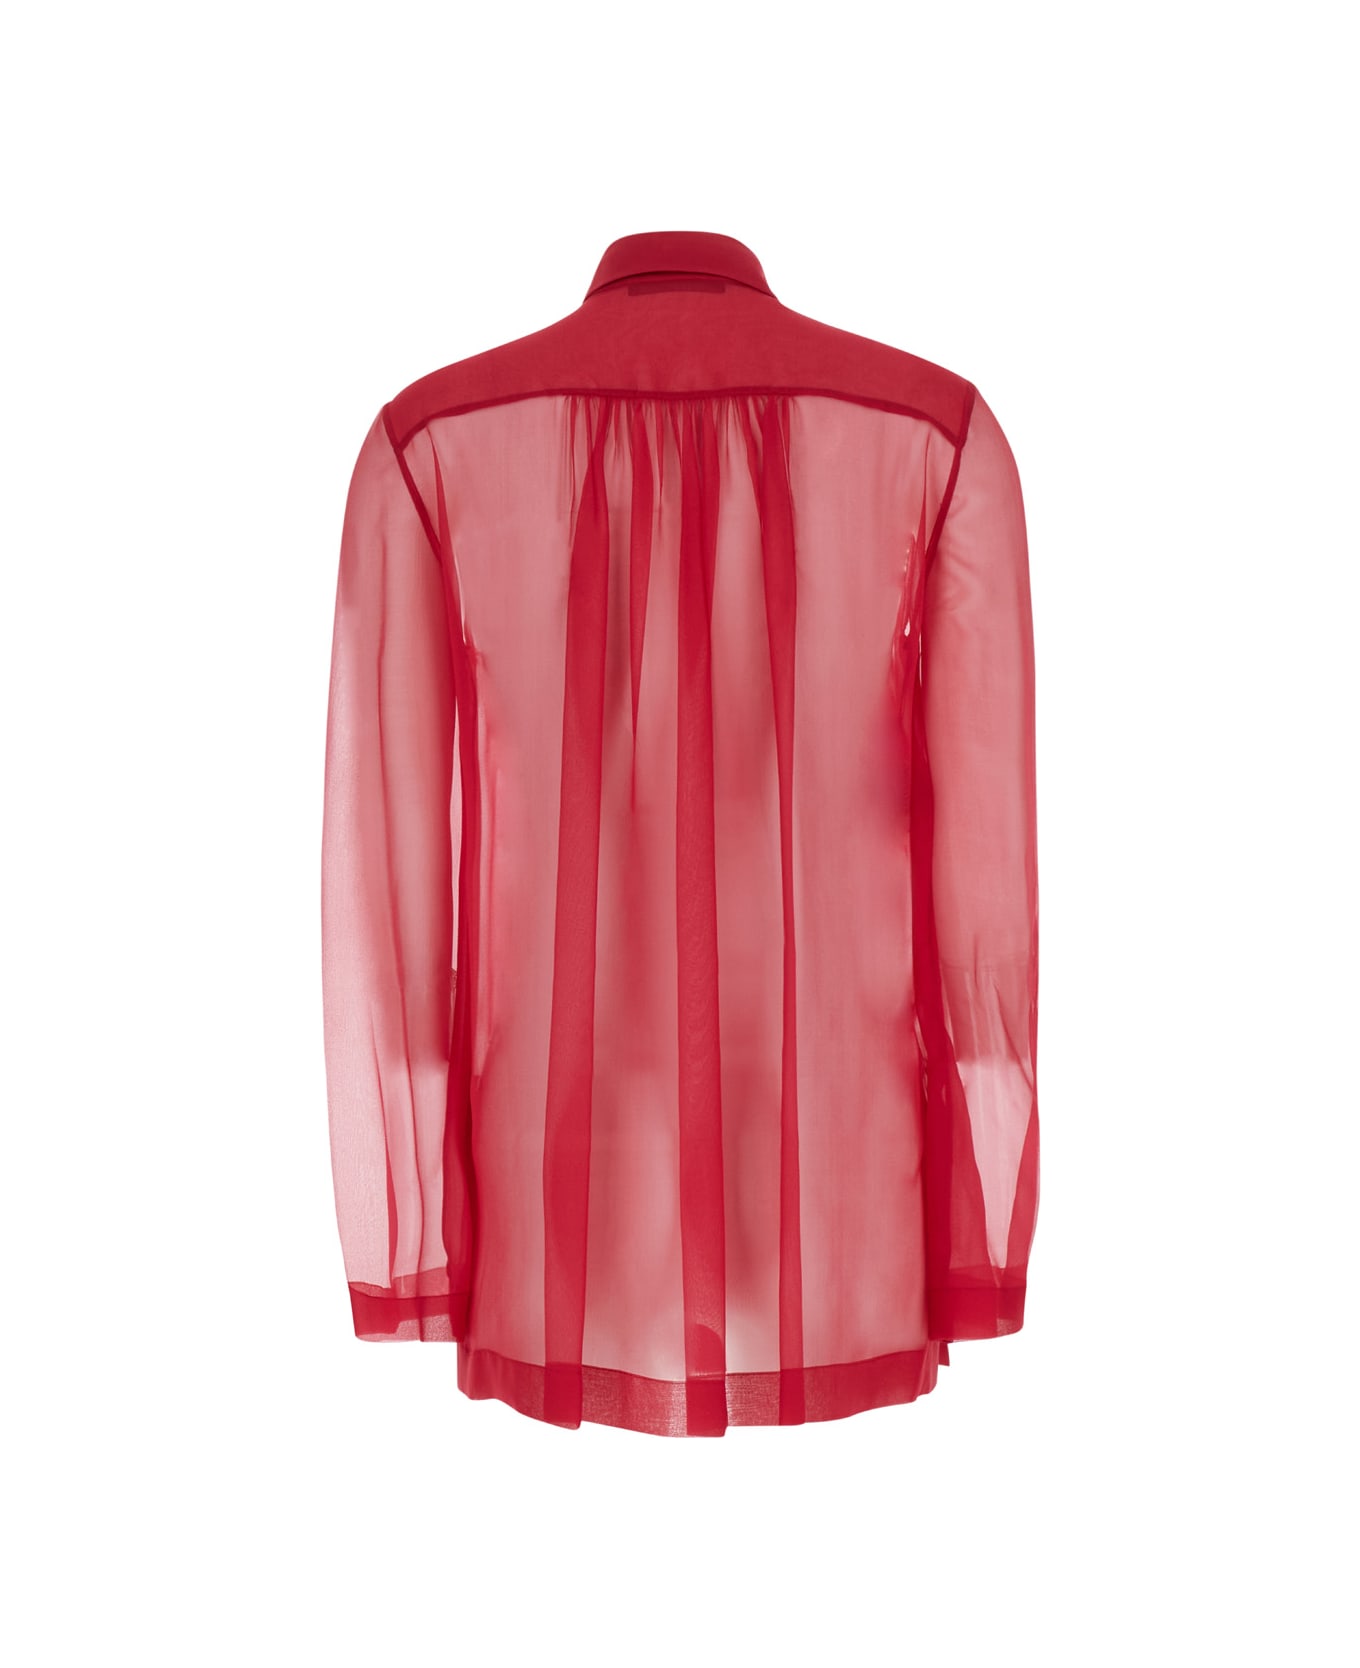 Alberta Ferretti Red Shirt With Pointed Collar In Chiffon Woman - Red